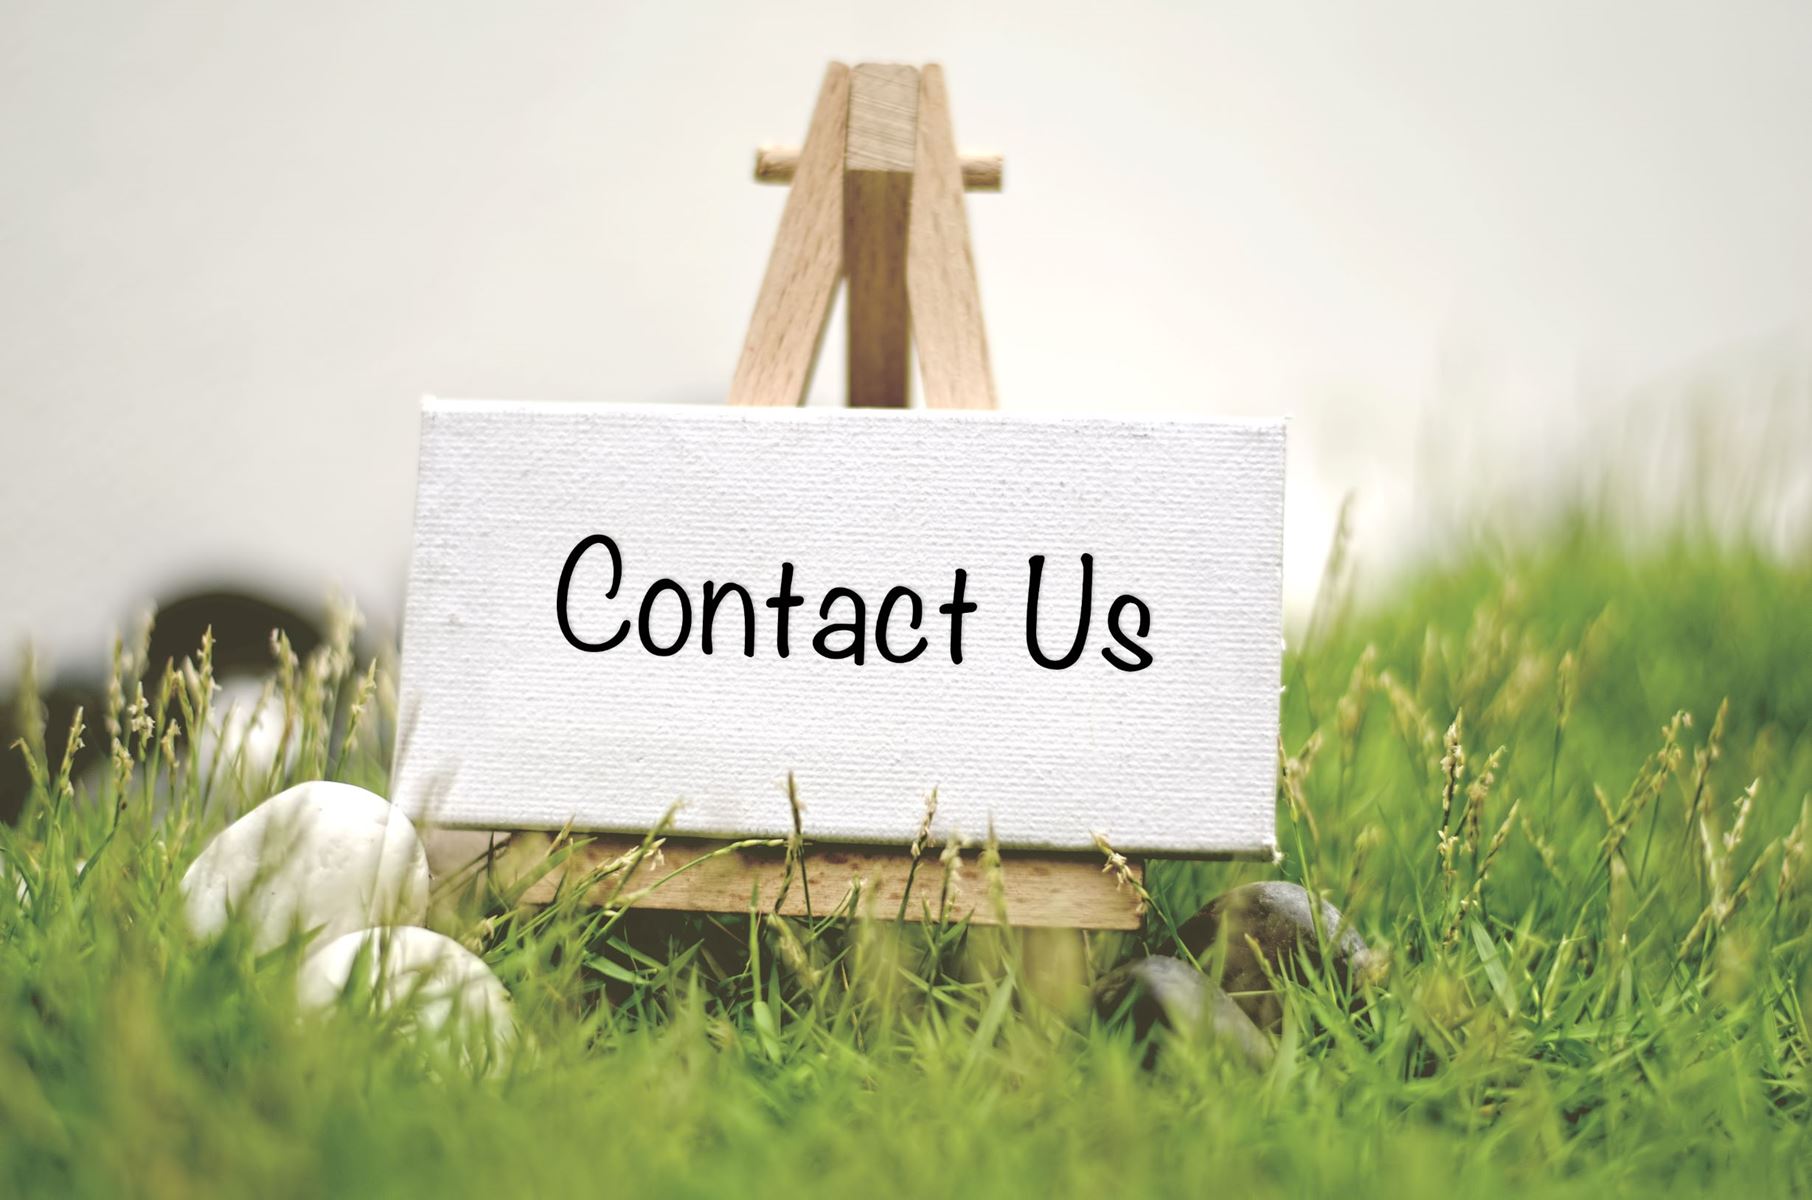 Contact us sign sitting on an easel in green grass